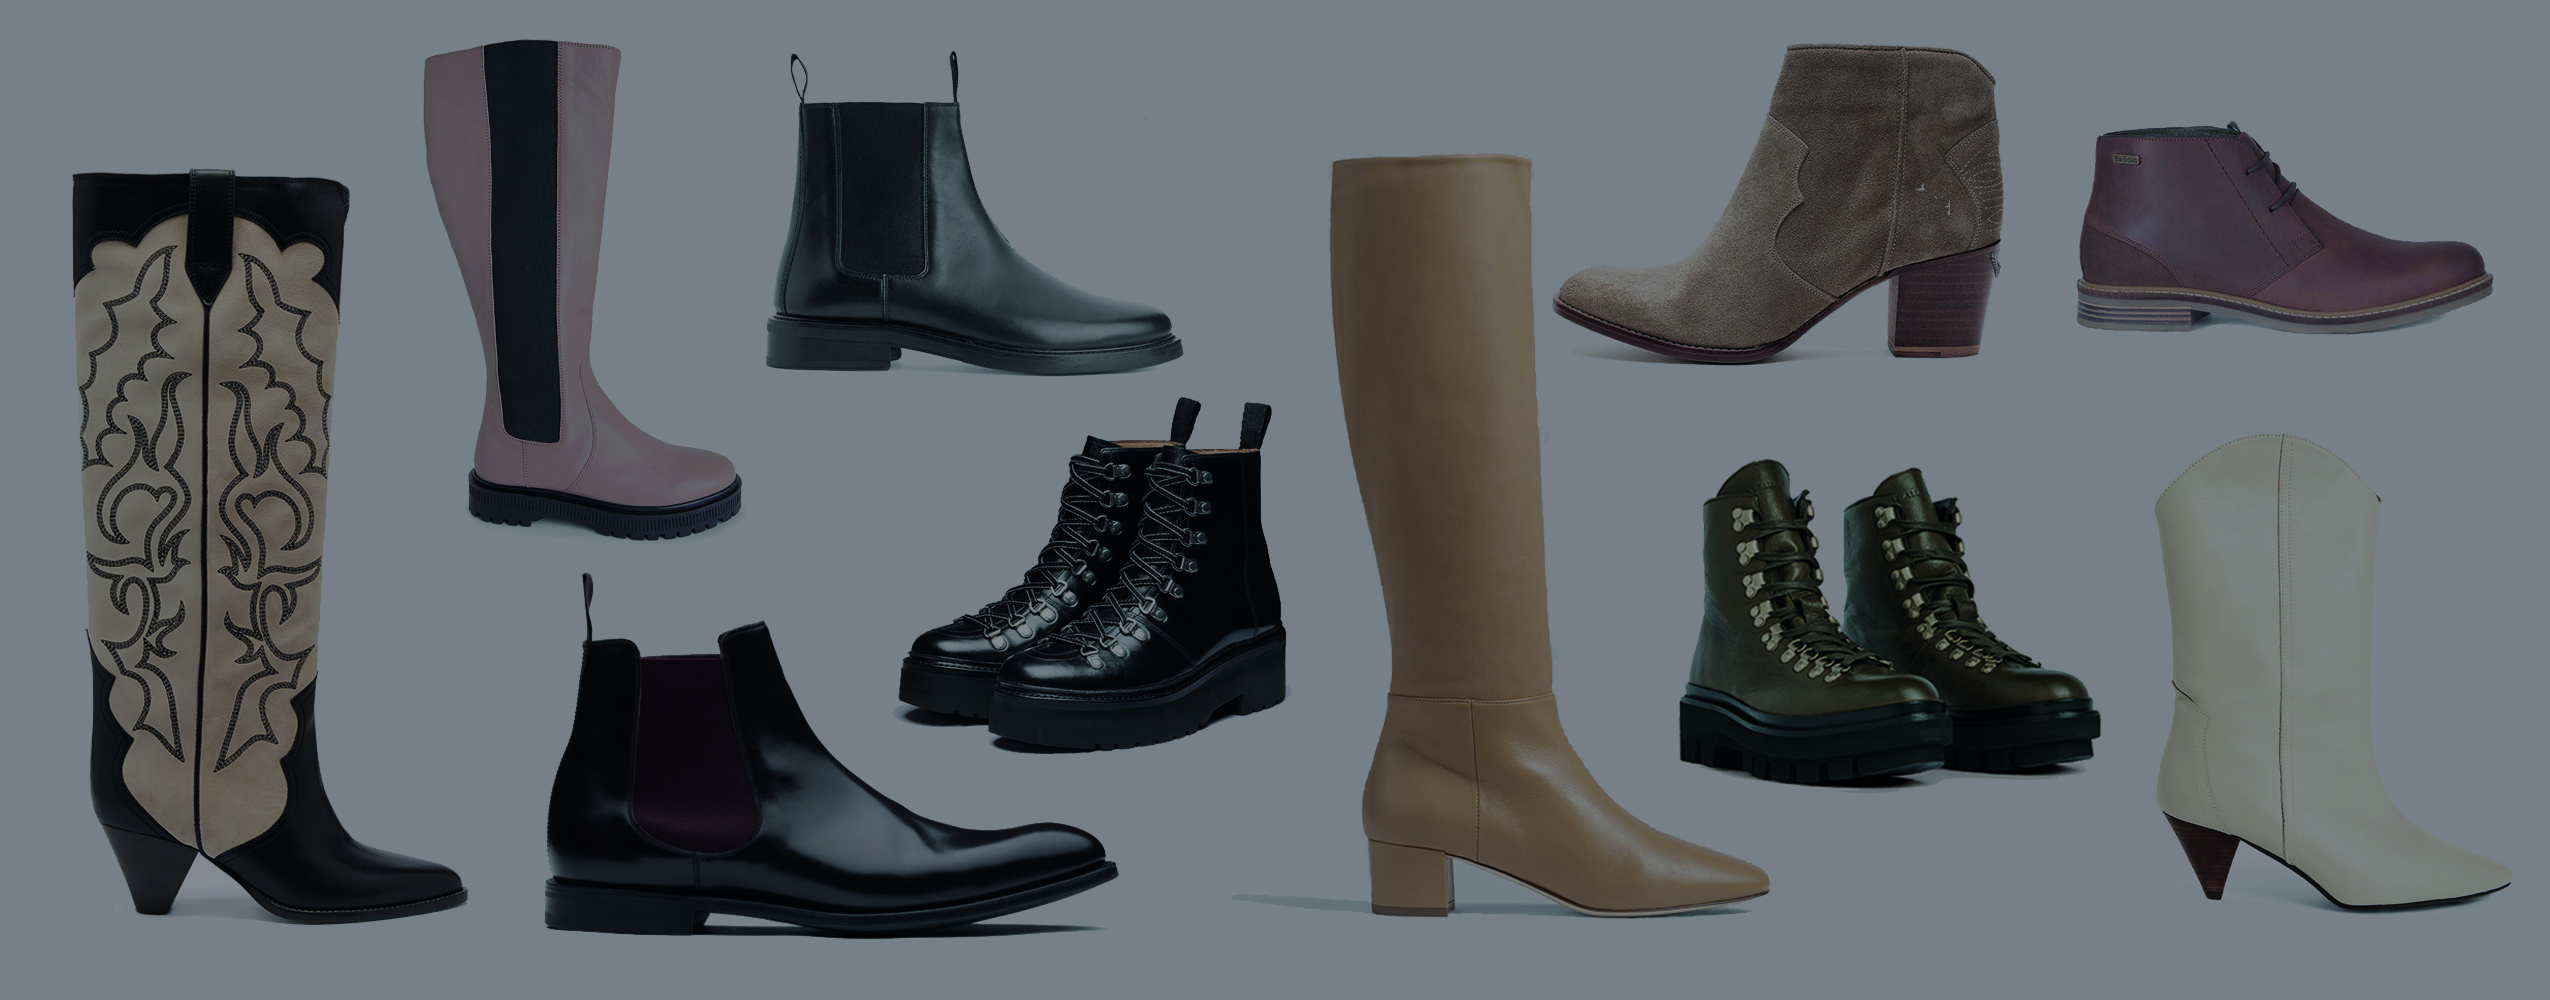 Which boot tribe are you?